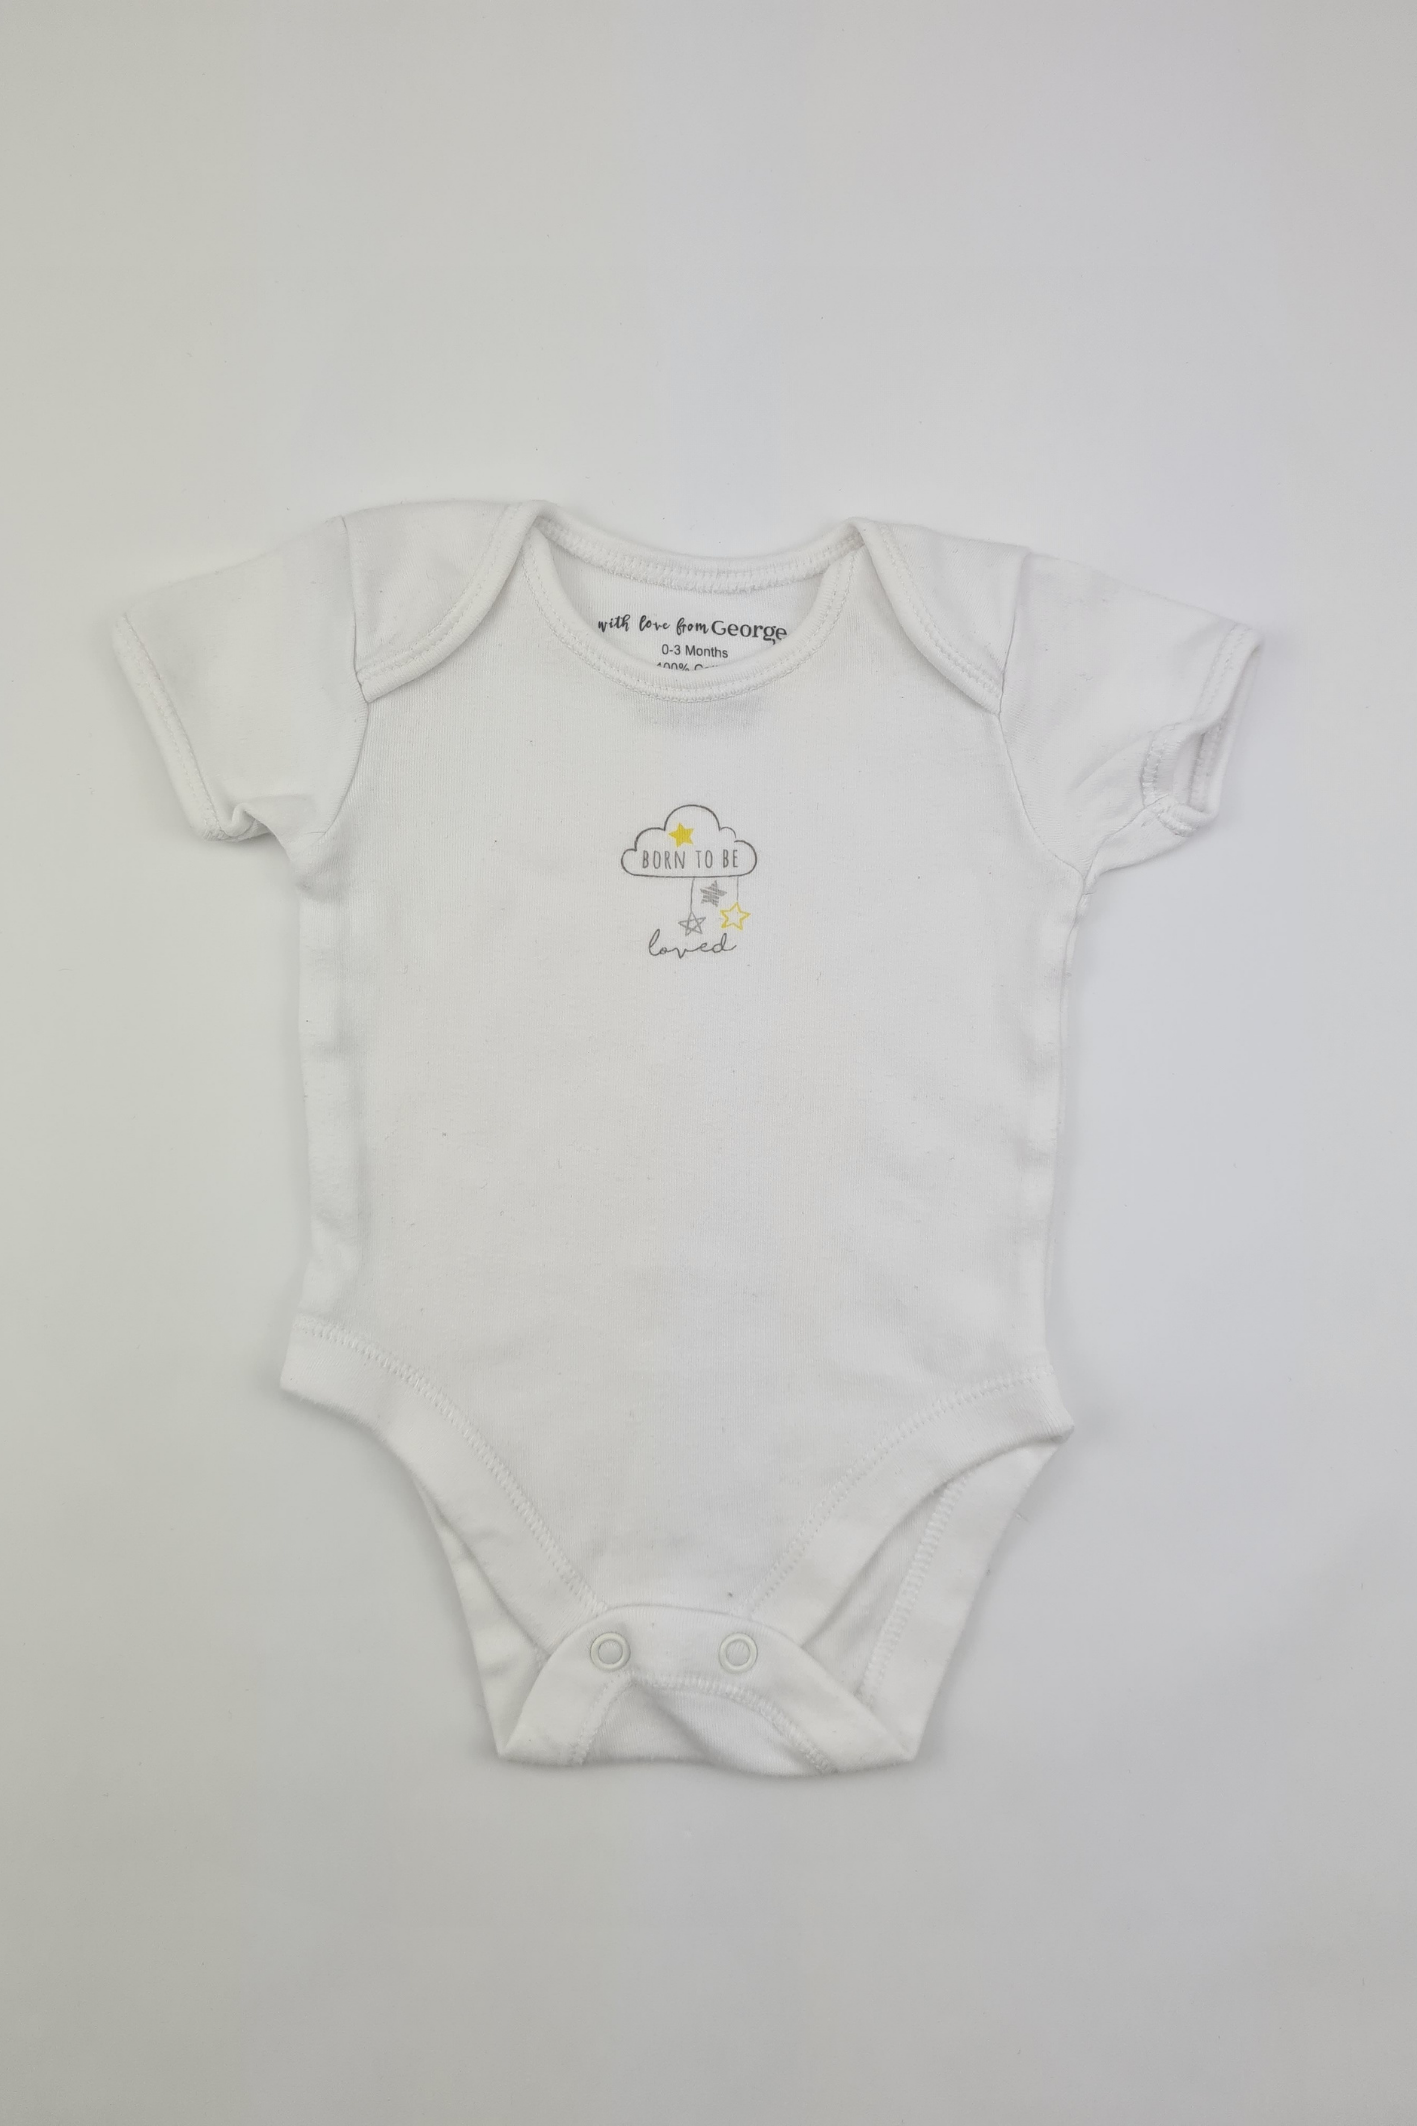 0-3m - 100% Cotton 'Born To Be Loved'  White Bodysuit (George)